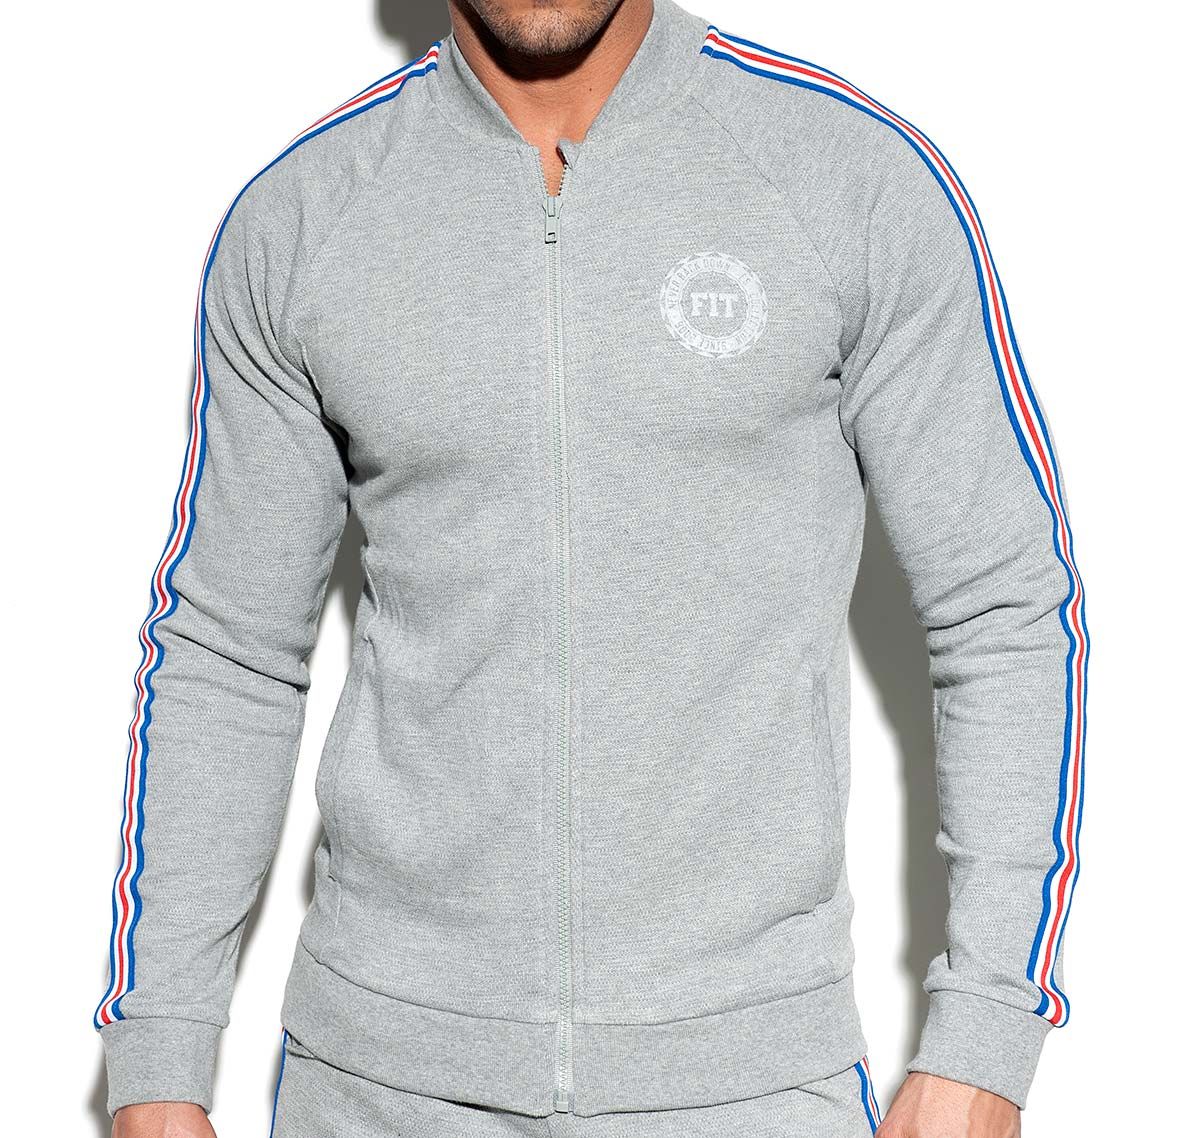 ES Collection Chaqueta deportiva FIT TAPE JACKET SP208, gris